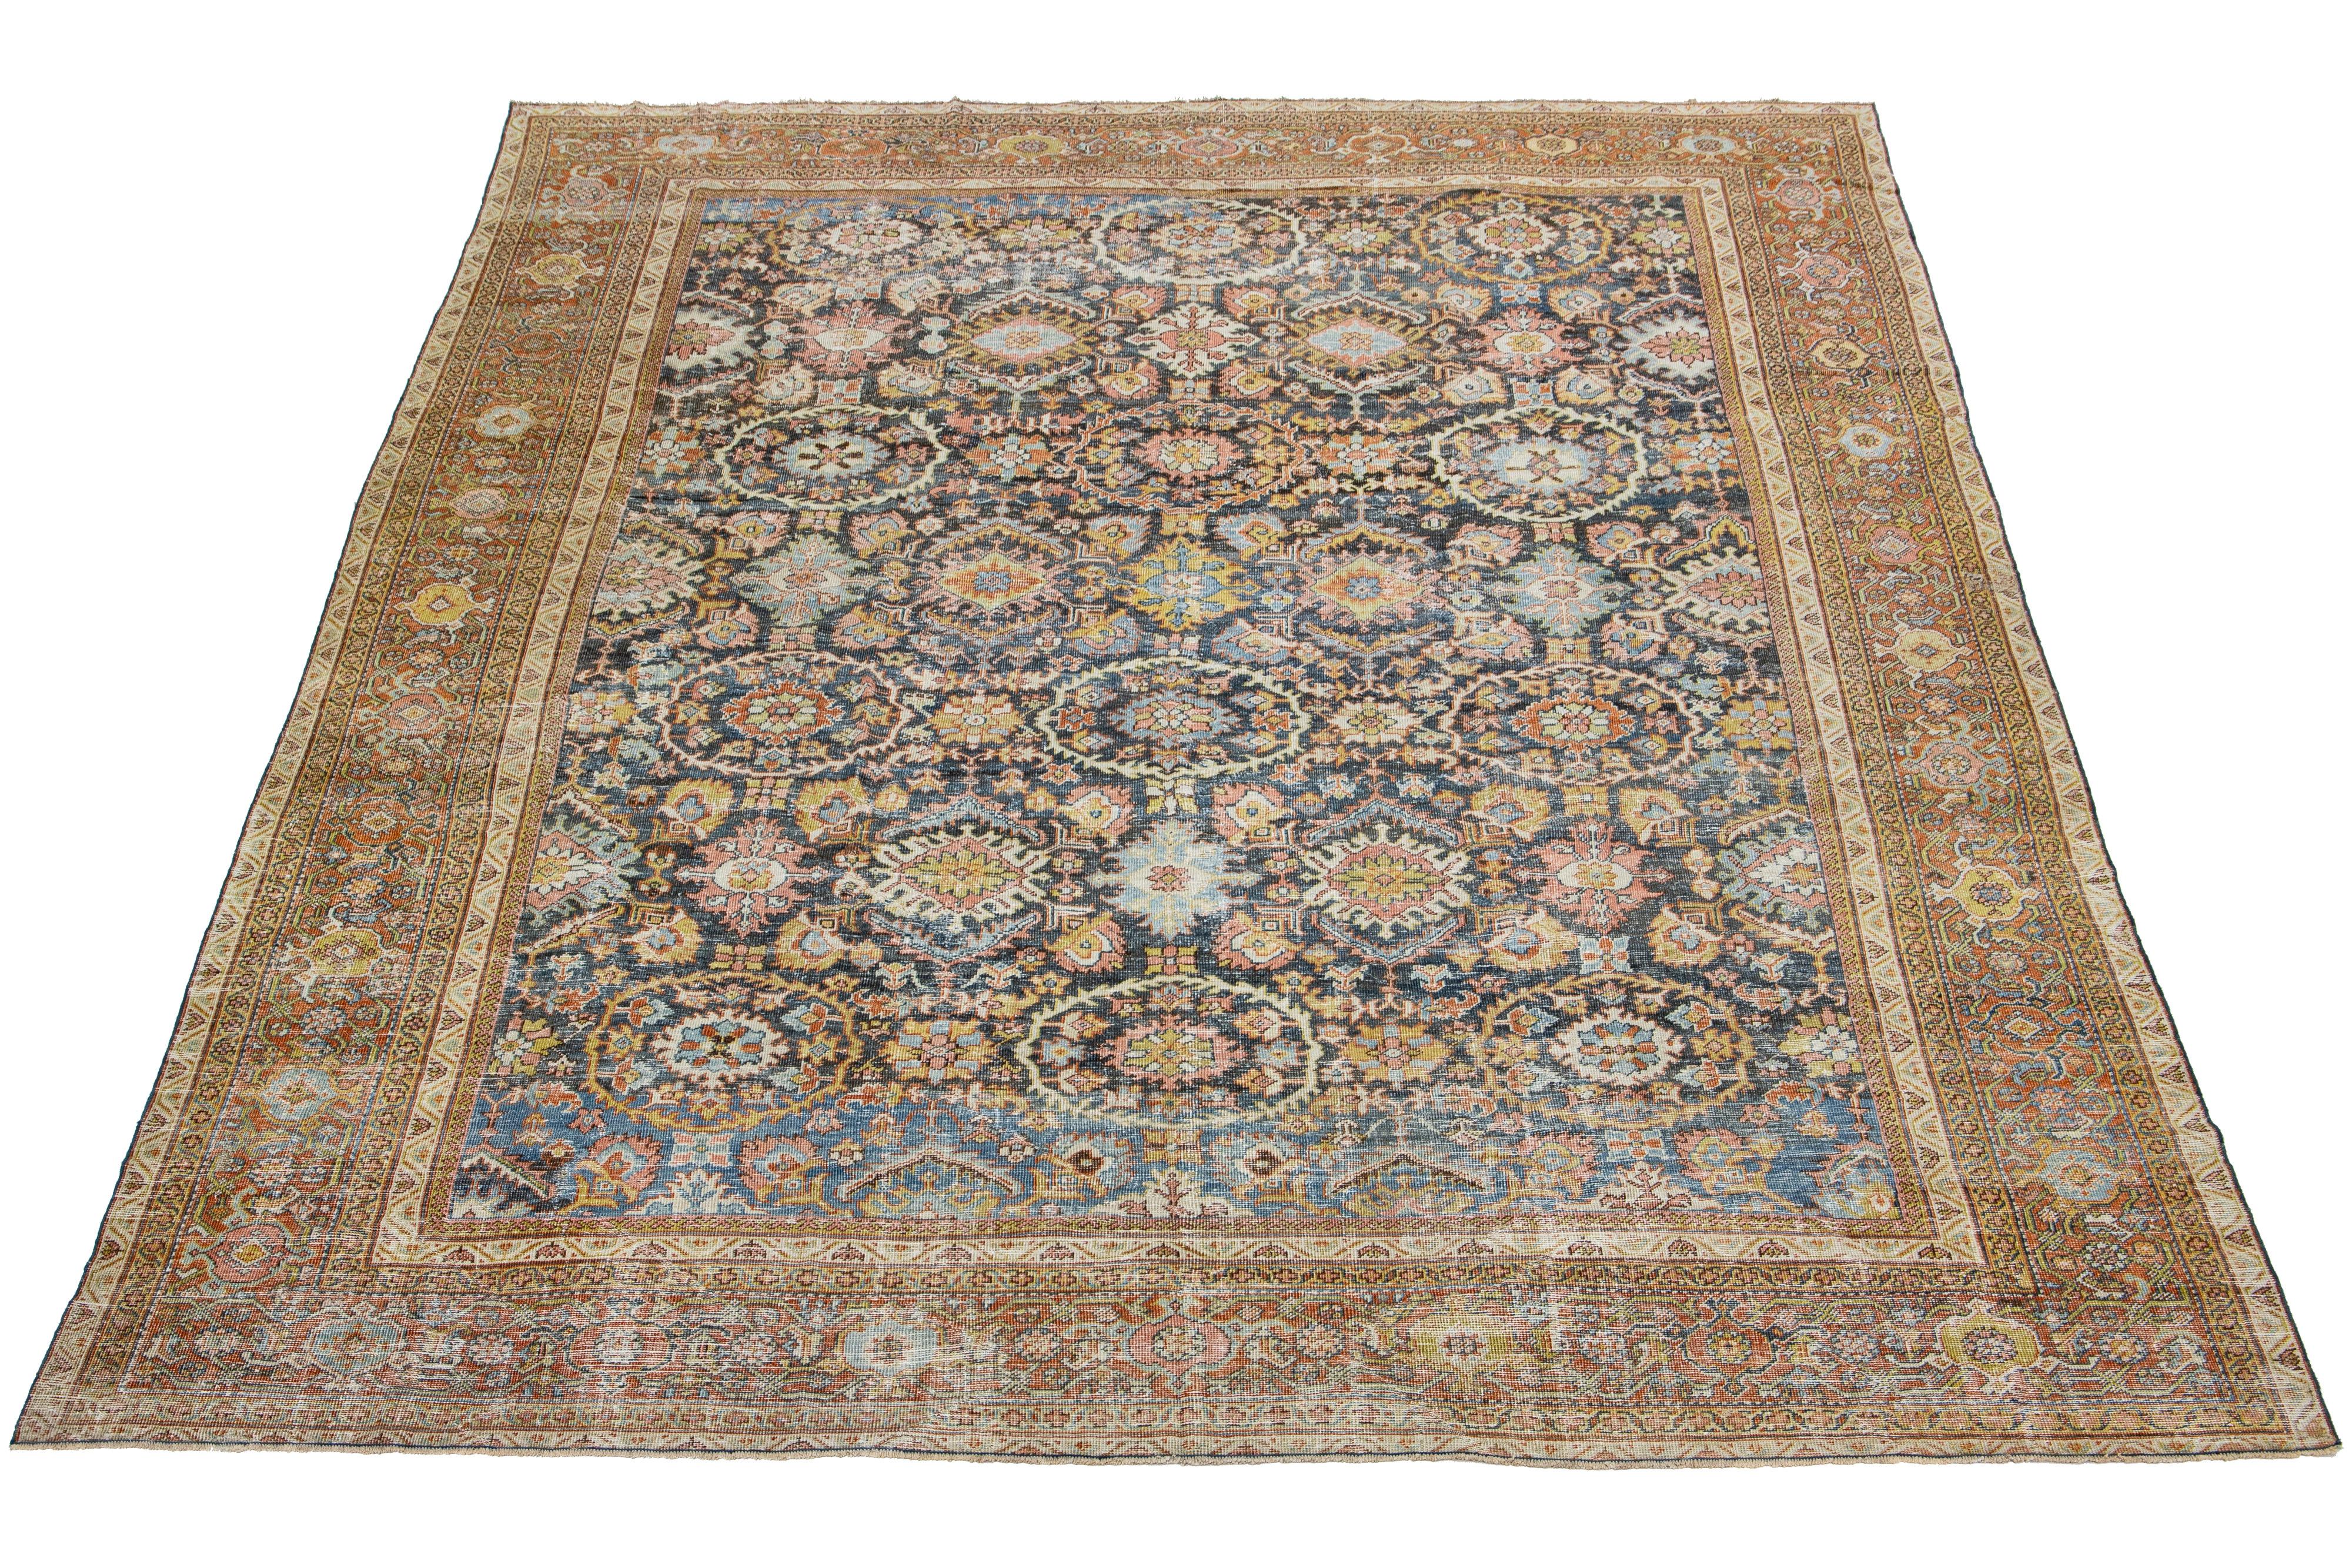 This stunning hand-knotted wool rug boasts a blue field with terracotta, beige, and yellow accents in a captivating all-over floral design.

This rug measures 10'5